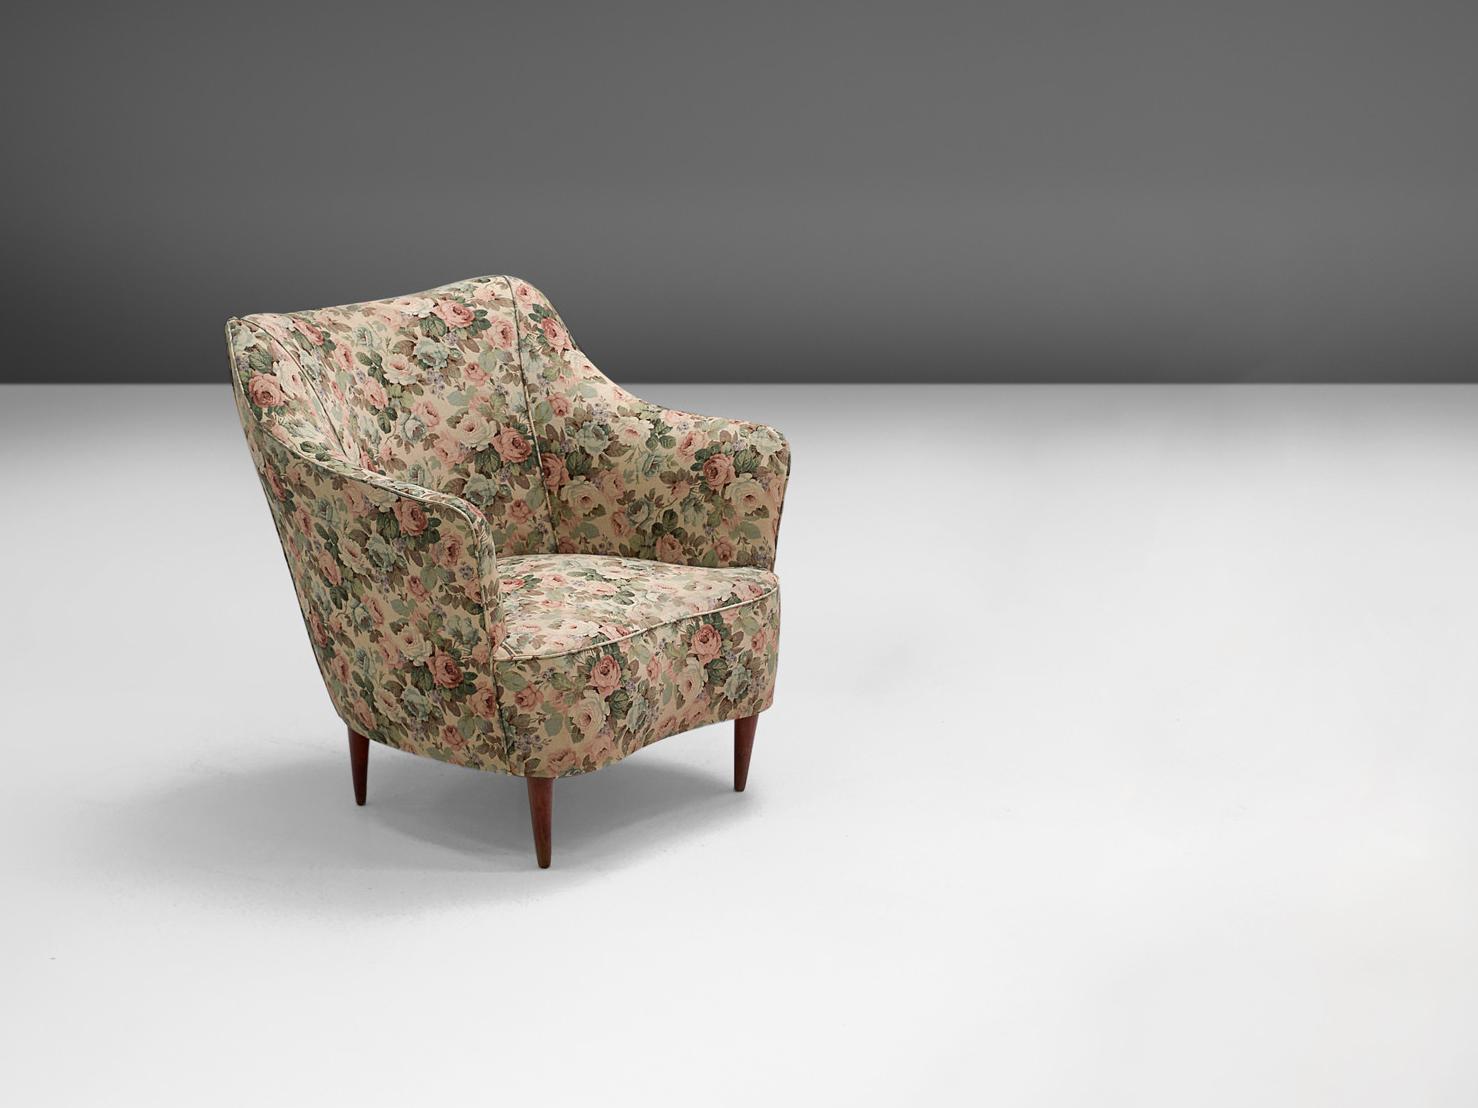 In the style of Gio Ponti, lounge chair, wood and floral fabric, Italy, 1940s.

Elegant and romantic club chair designed in the style of Gio Ponti with original upholstery of fauna and flora. The design is based on a splendid construction of